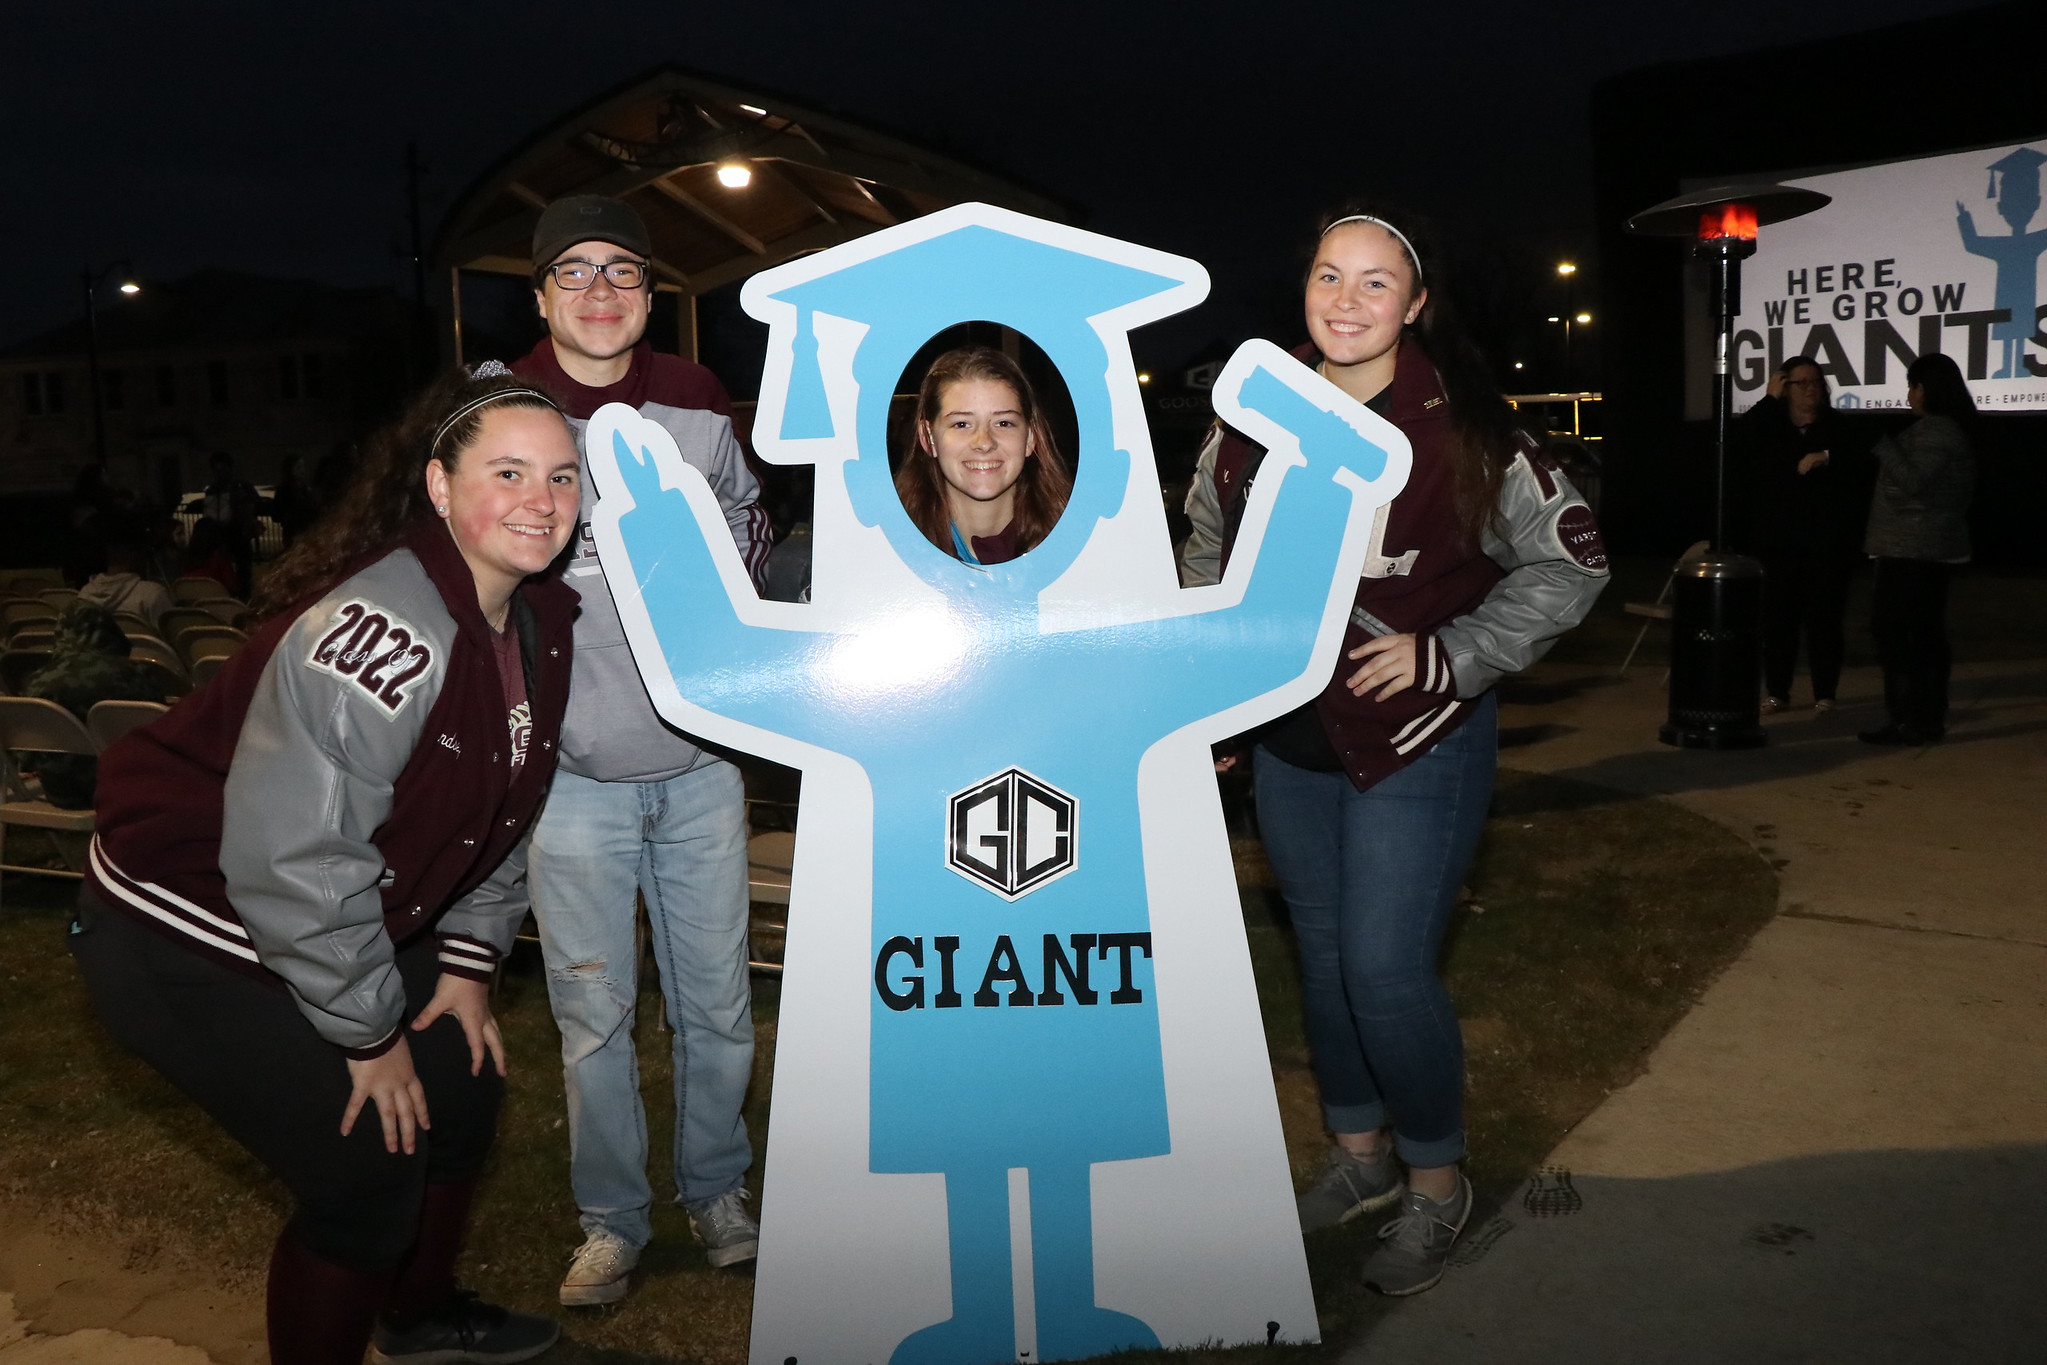 Lee High School students pose with Giant cutout